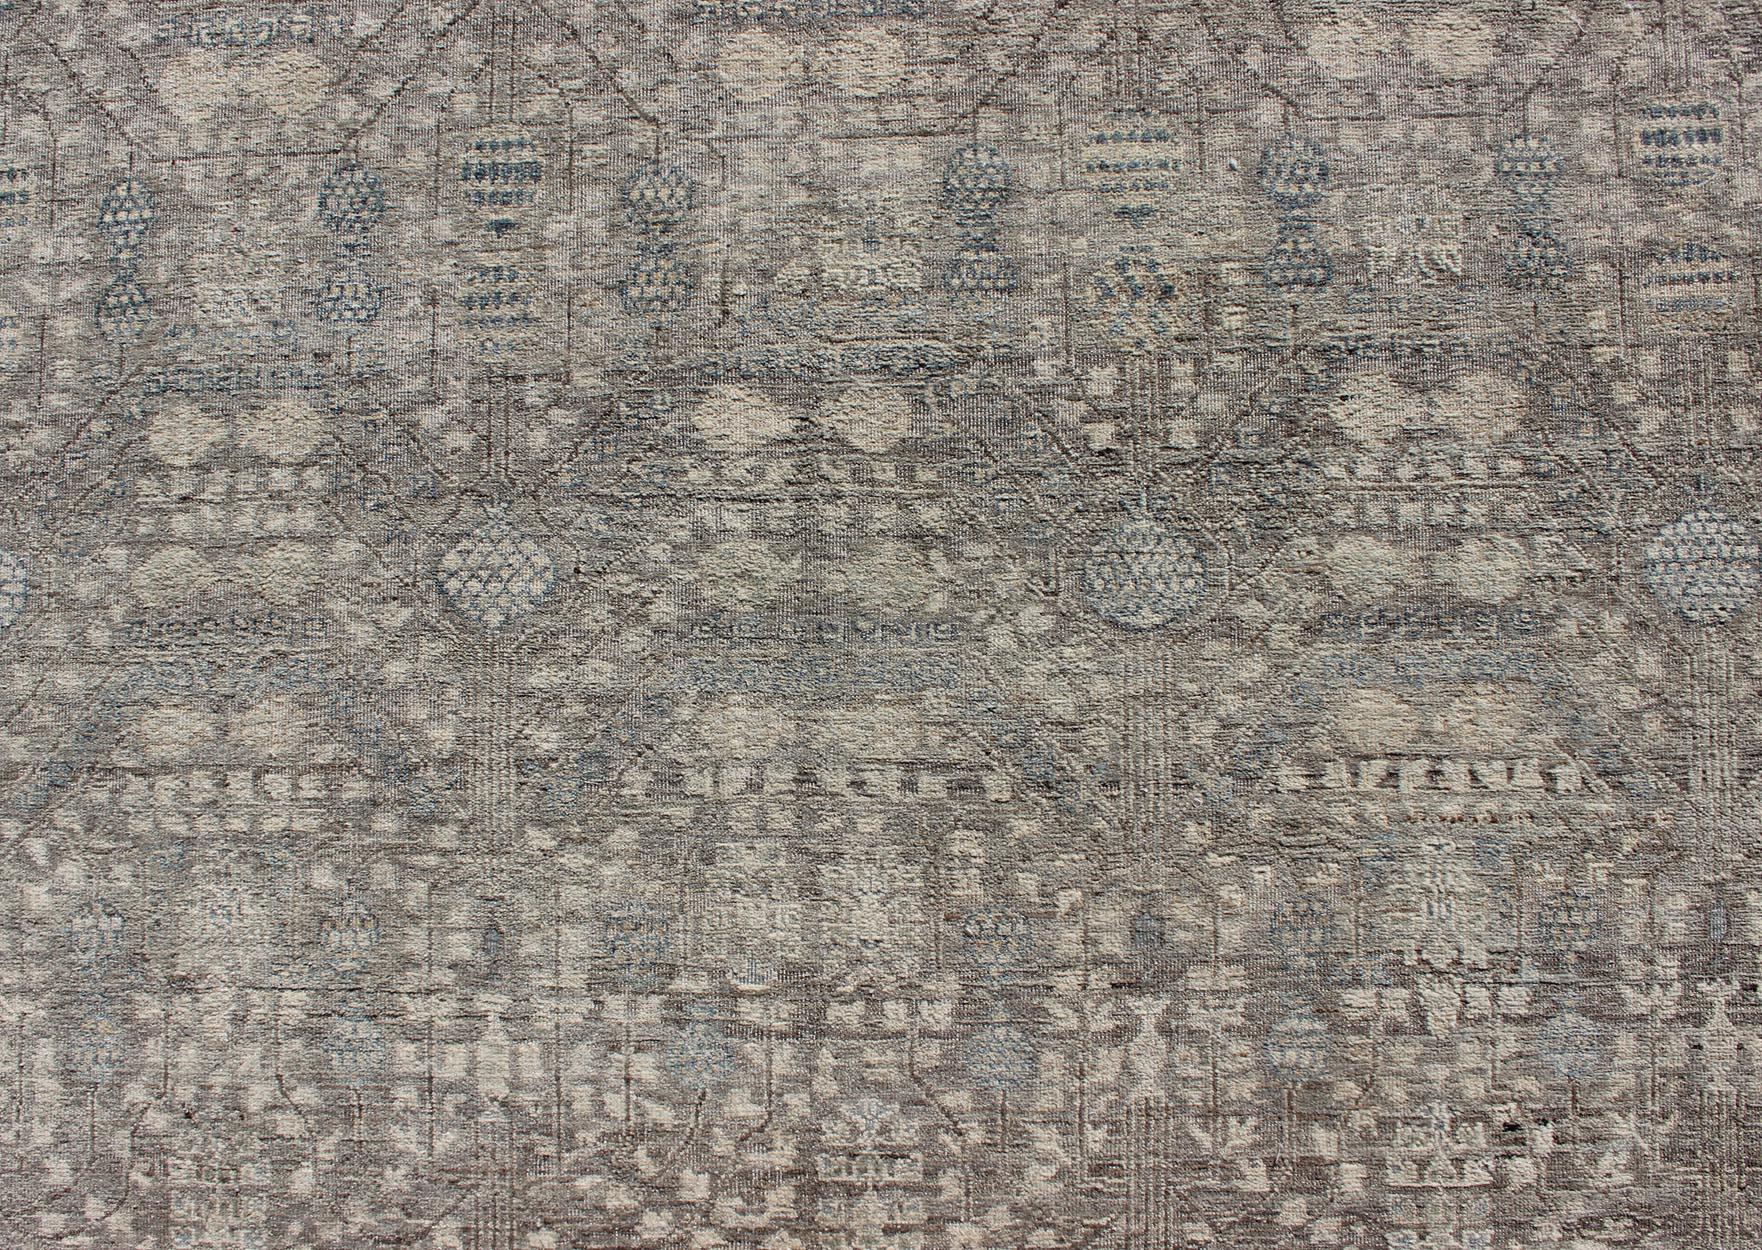 Modern Fine Weave Distressed Tabriz Rug in Taupe, Gray, Blue and Neutral Tones  For Sale 6